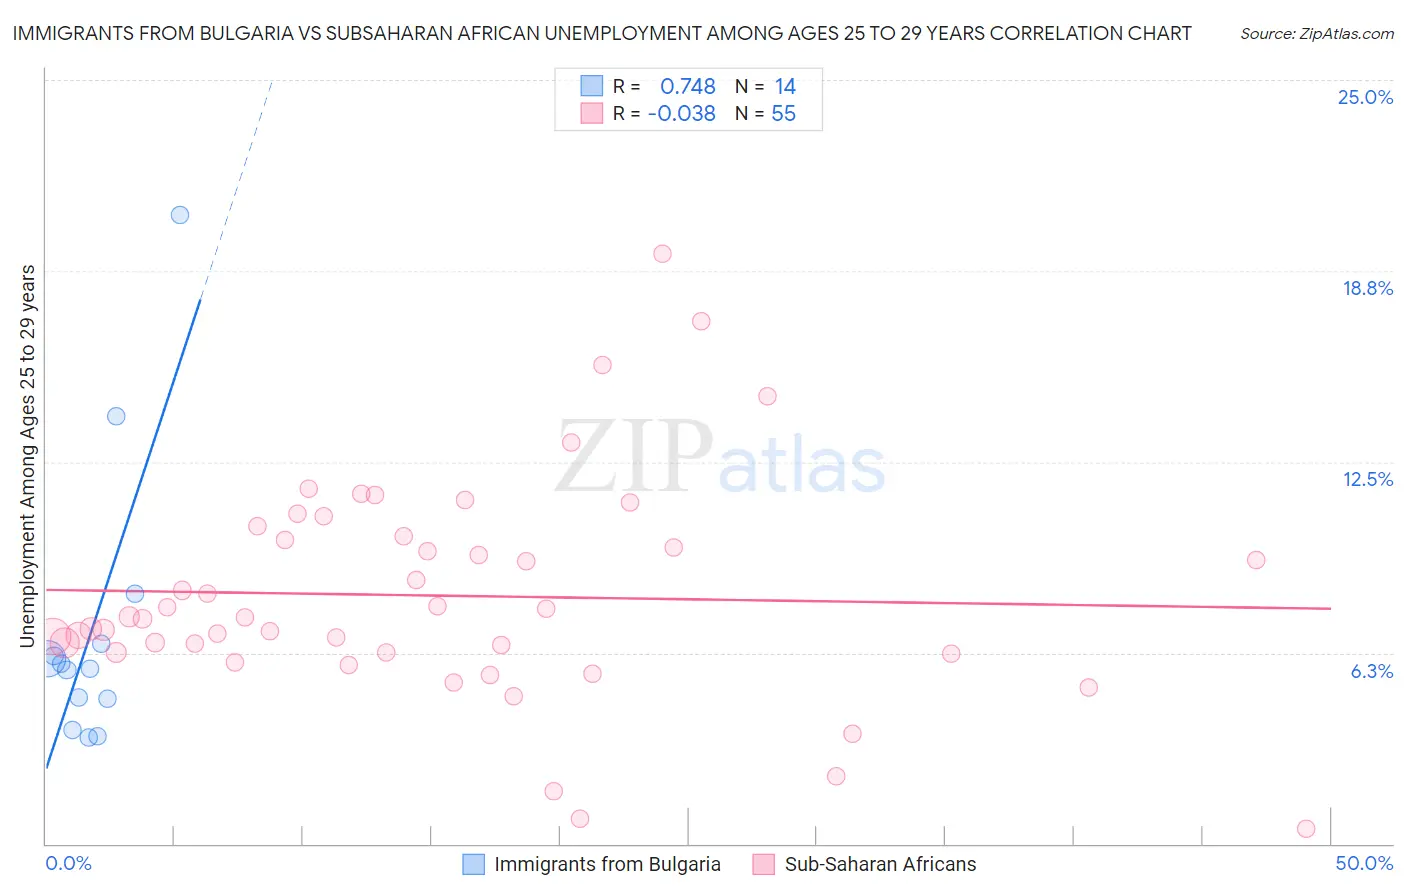 Immigrants from Bulgaria vs Subsaharan African Unemployment Among Ages 25 to 29 years